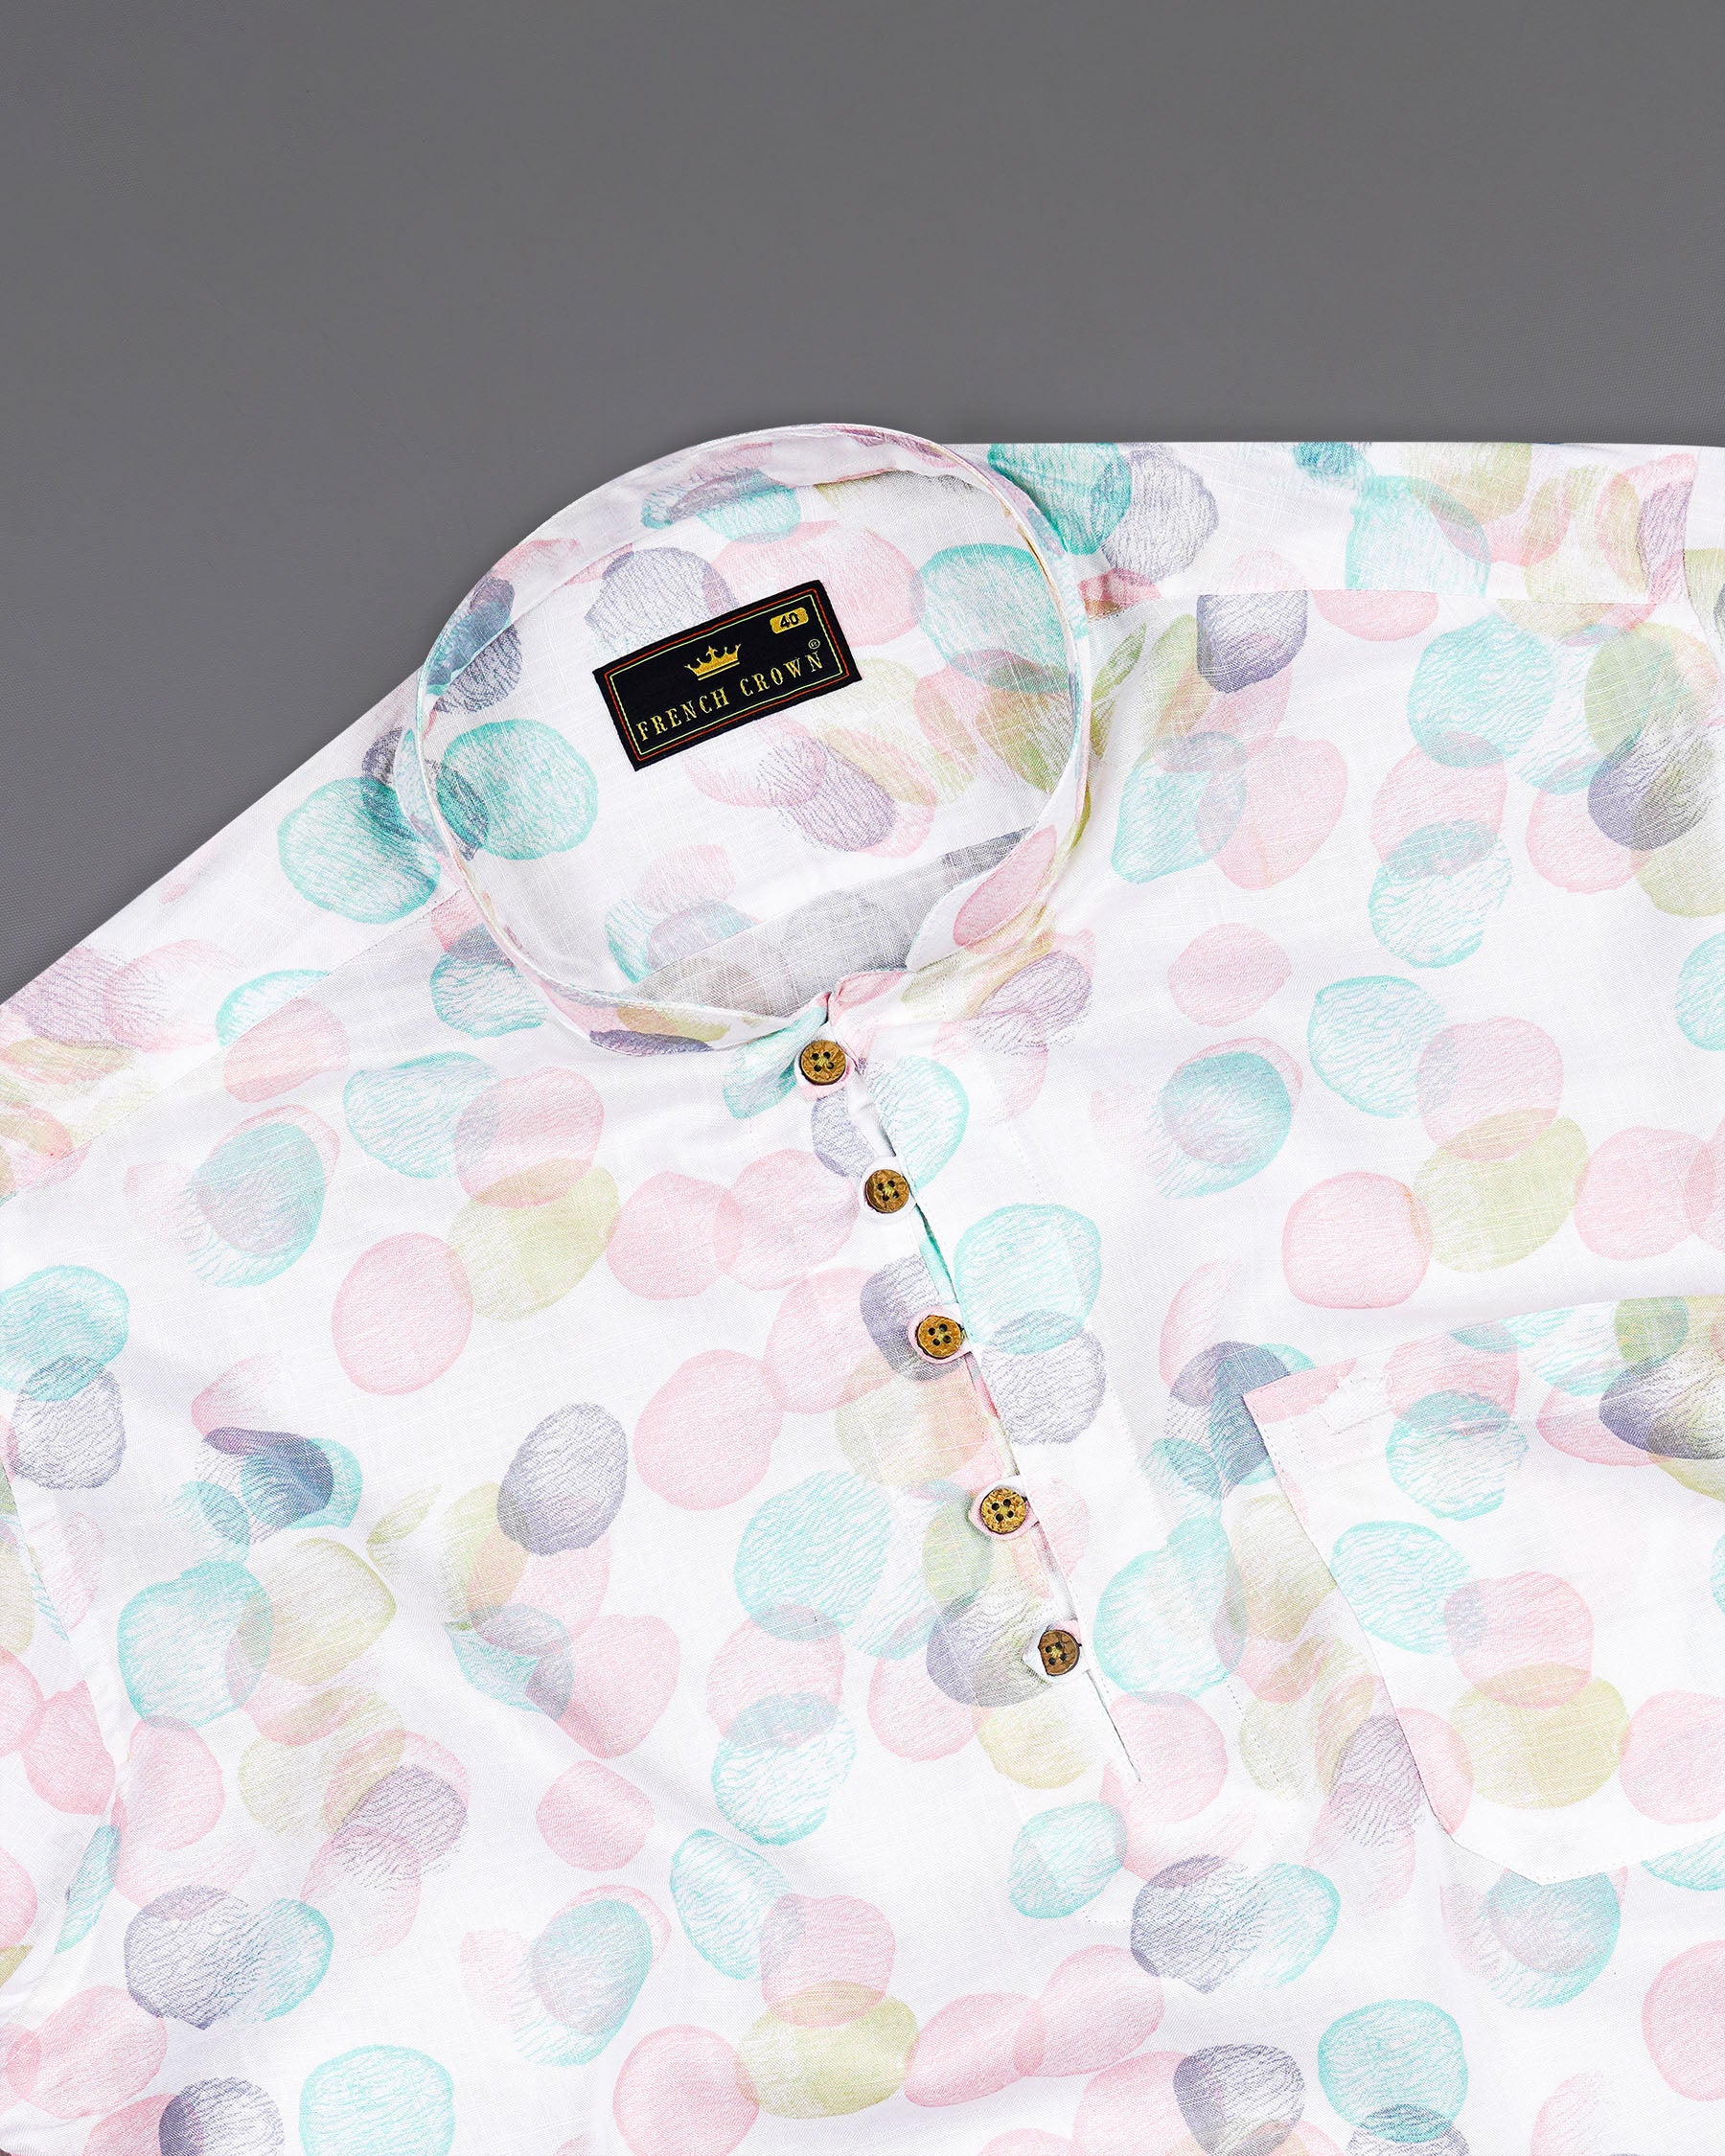 Iceberg Blue and Quill Pink Polka Dotted Premium Tencel Kurta Shirt 7923-KS-38, 7923-KS-H-38, 7923-KS-39, 7923-KS-H-39, 7923-KS-40, 7923-KS-H-40, 7923-KS-42, 7923-KS-H-42, 7923-KS-44, 7923-KS-H-44, 7923-KS-46, 7923-KS-H-46, 7923-KS-48, 7923-KS-H-48, 7923-KS-50, 7923-KS-H-50, 7923-KS-52, 7923-KS-H-52